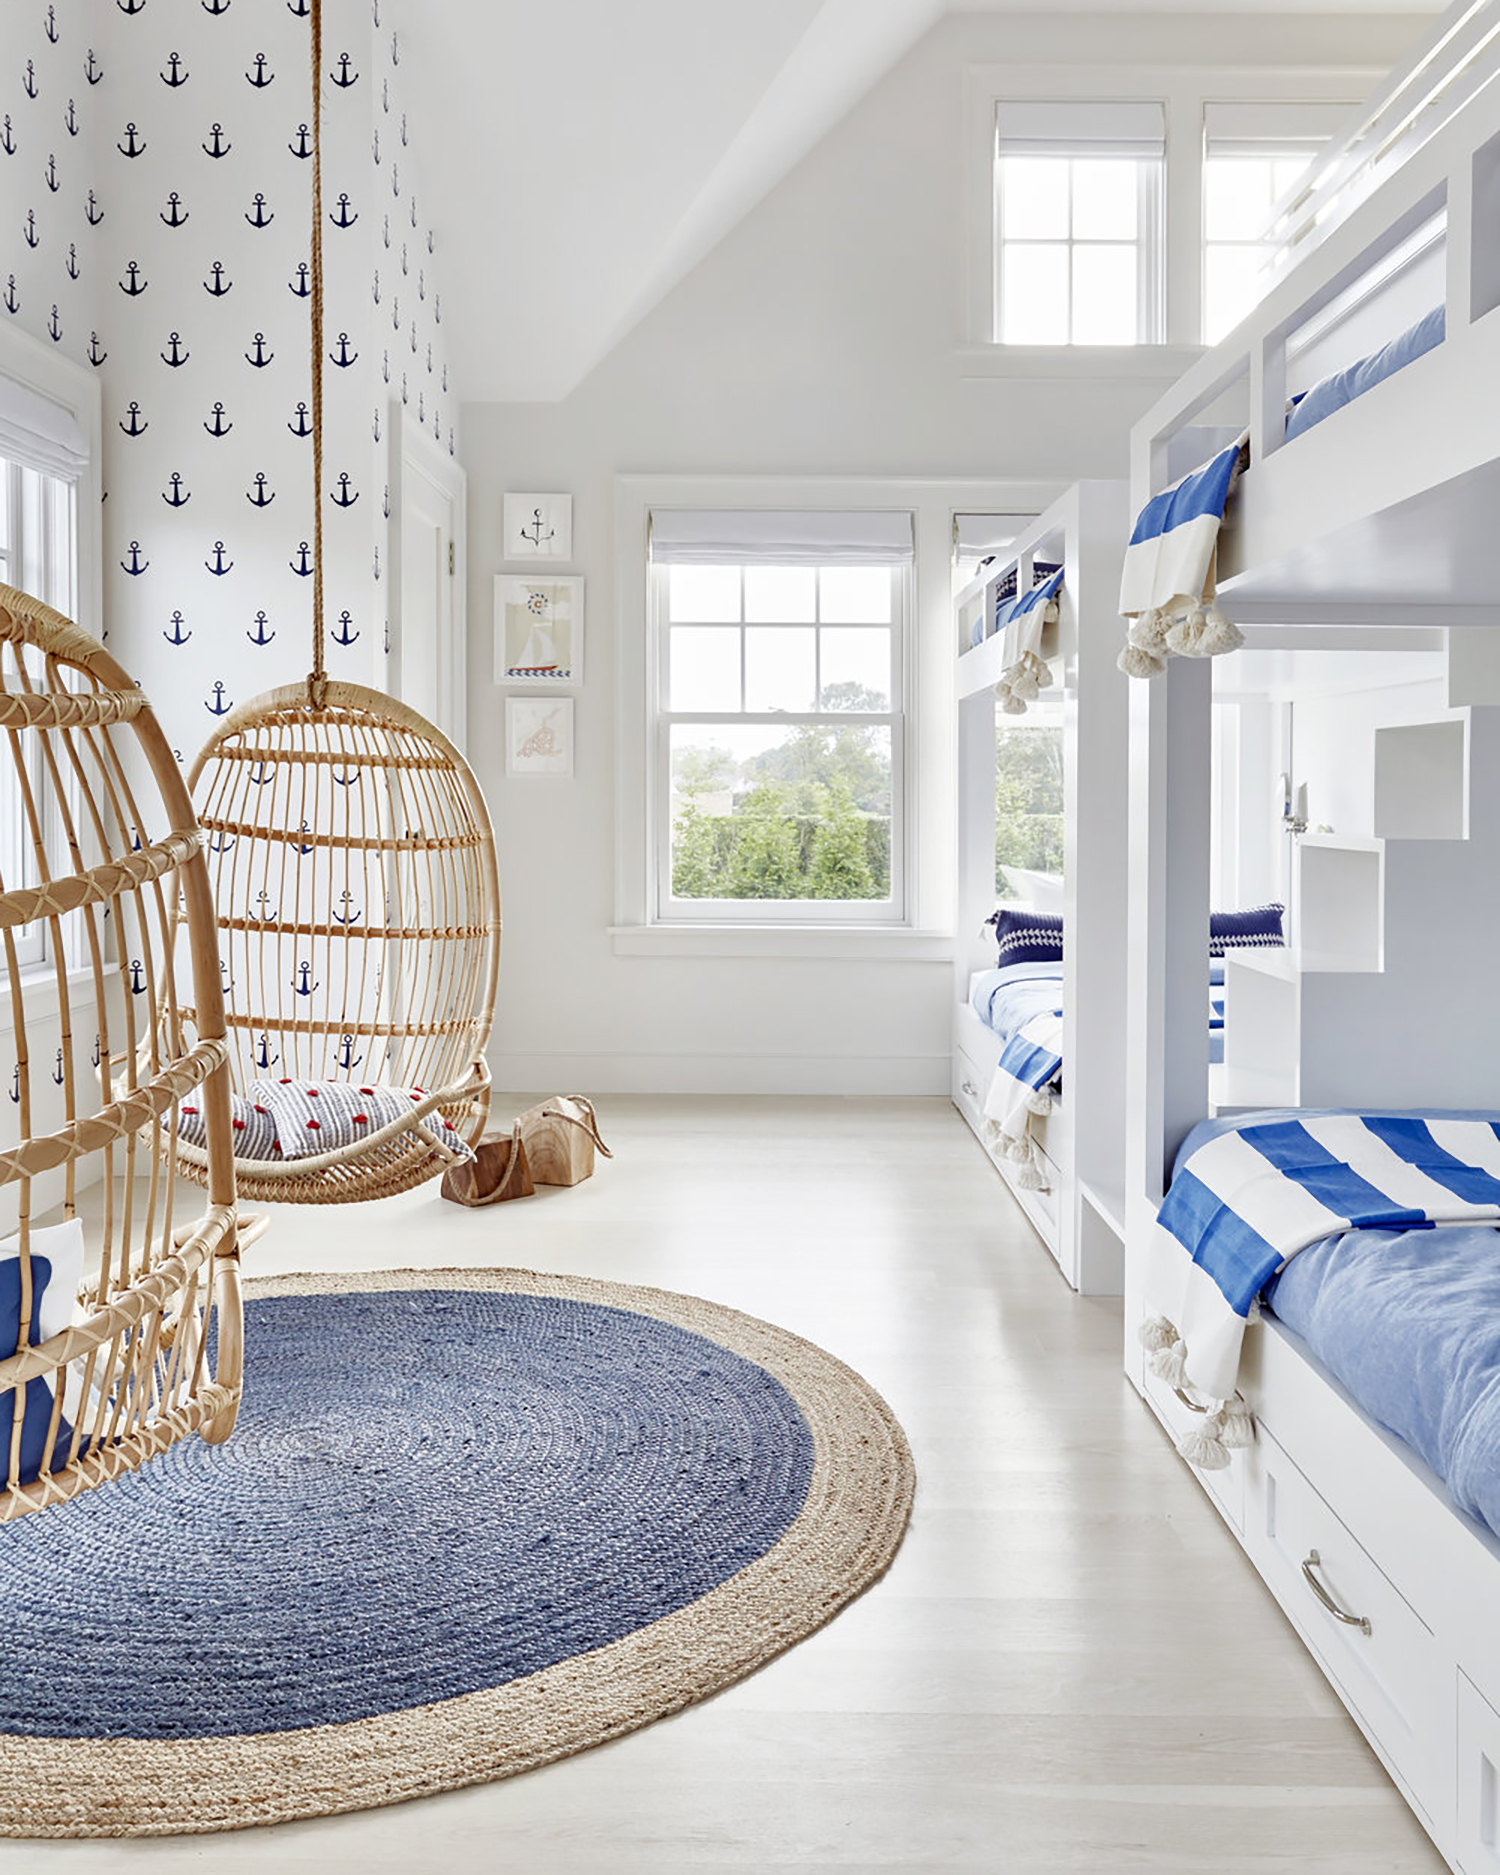 Childrens room with bunkbeds and swinging chairs